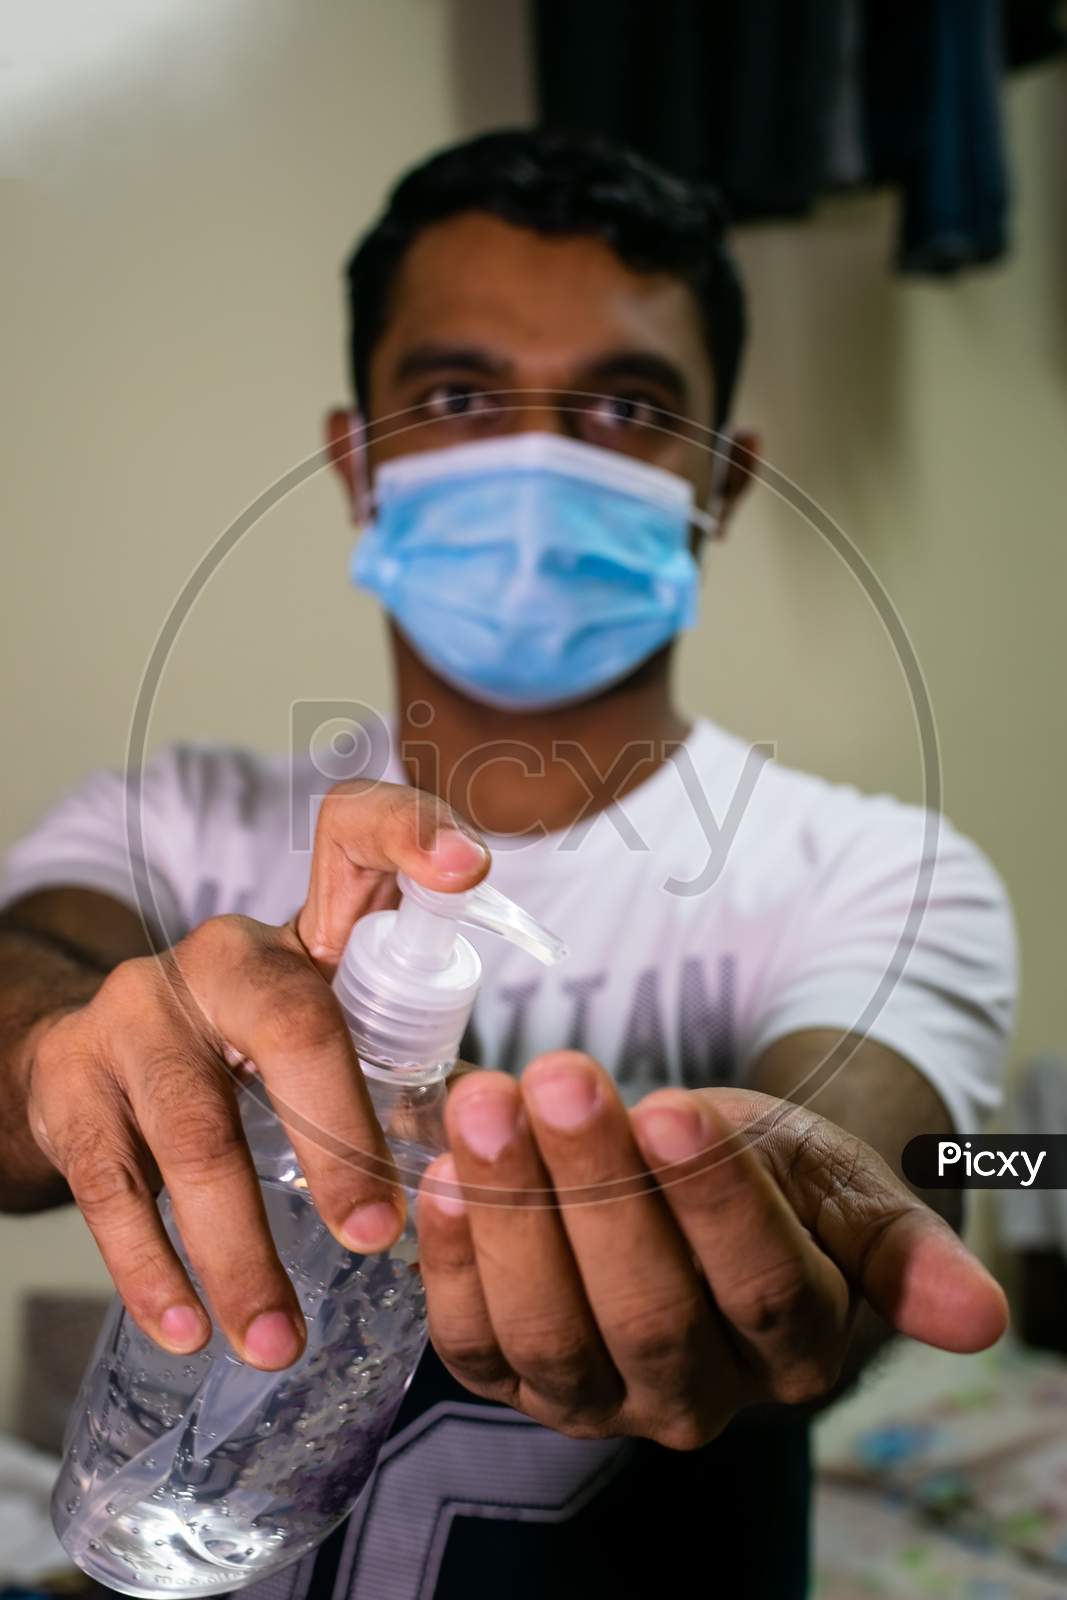 An Indian Man Wearing Mask And Taking Hand Sanitizer To His Hand